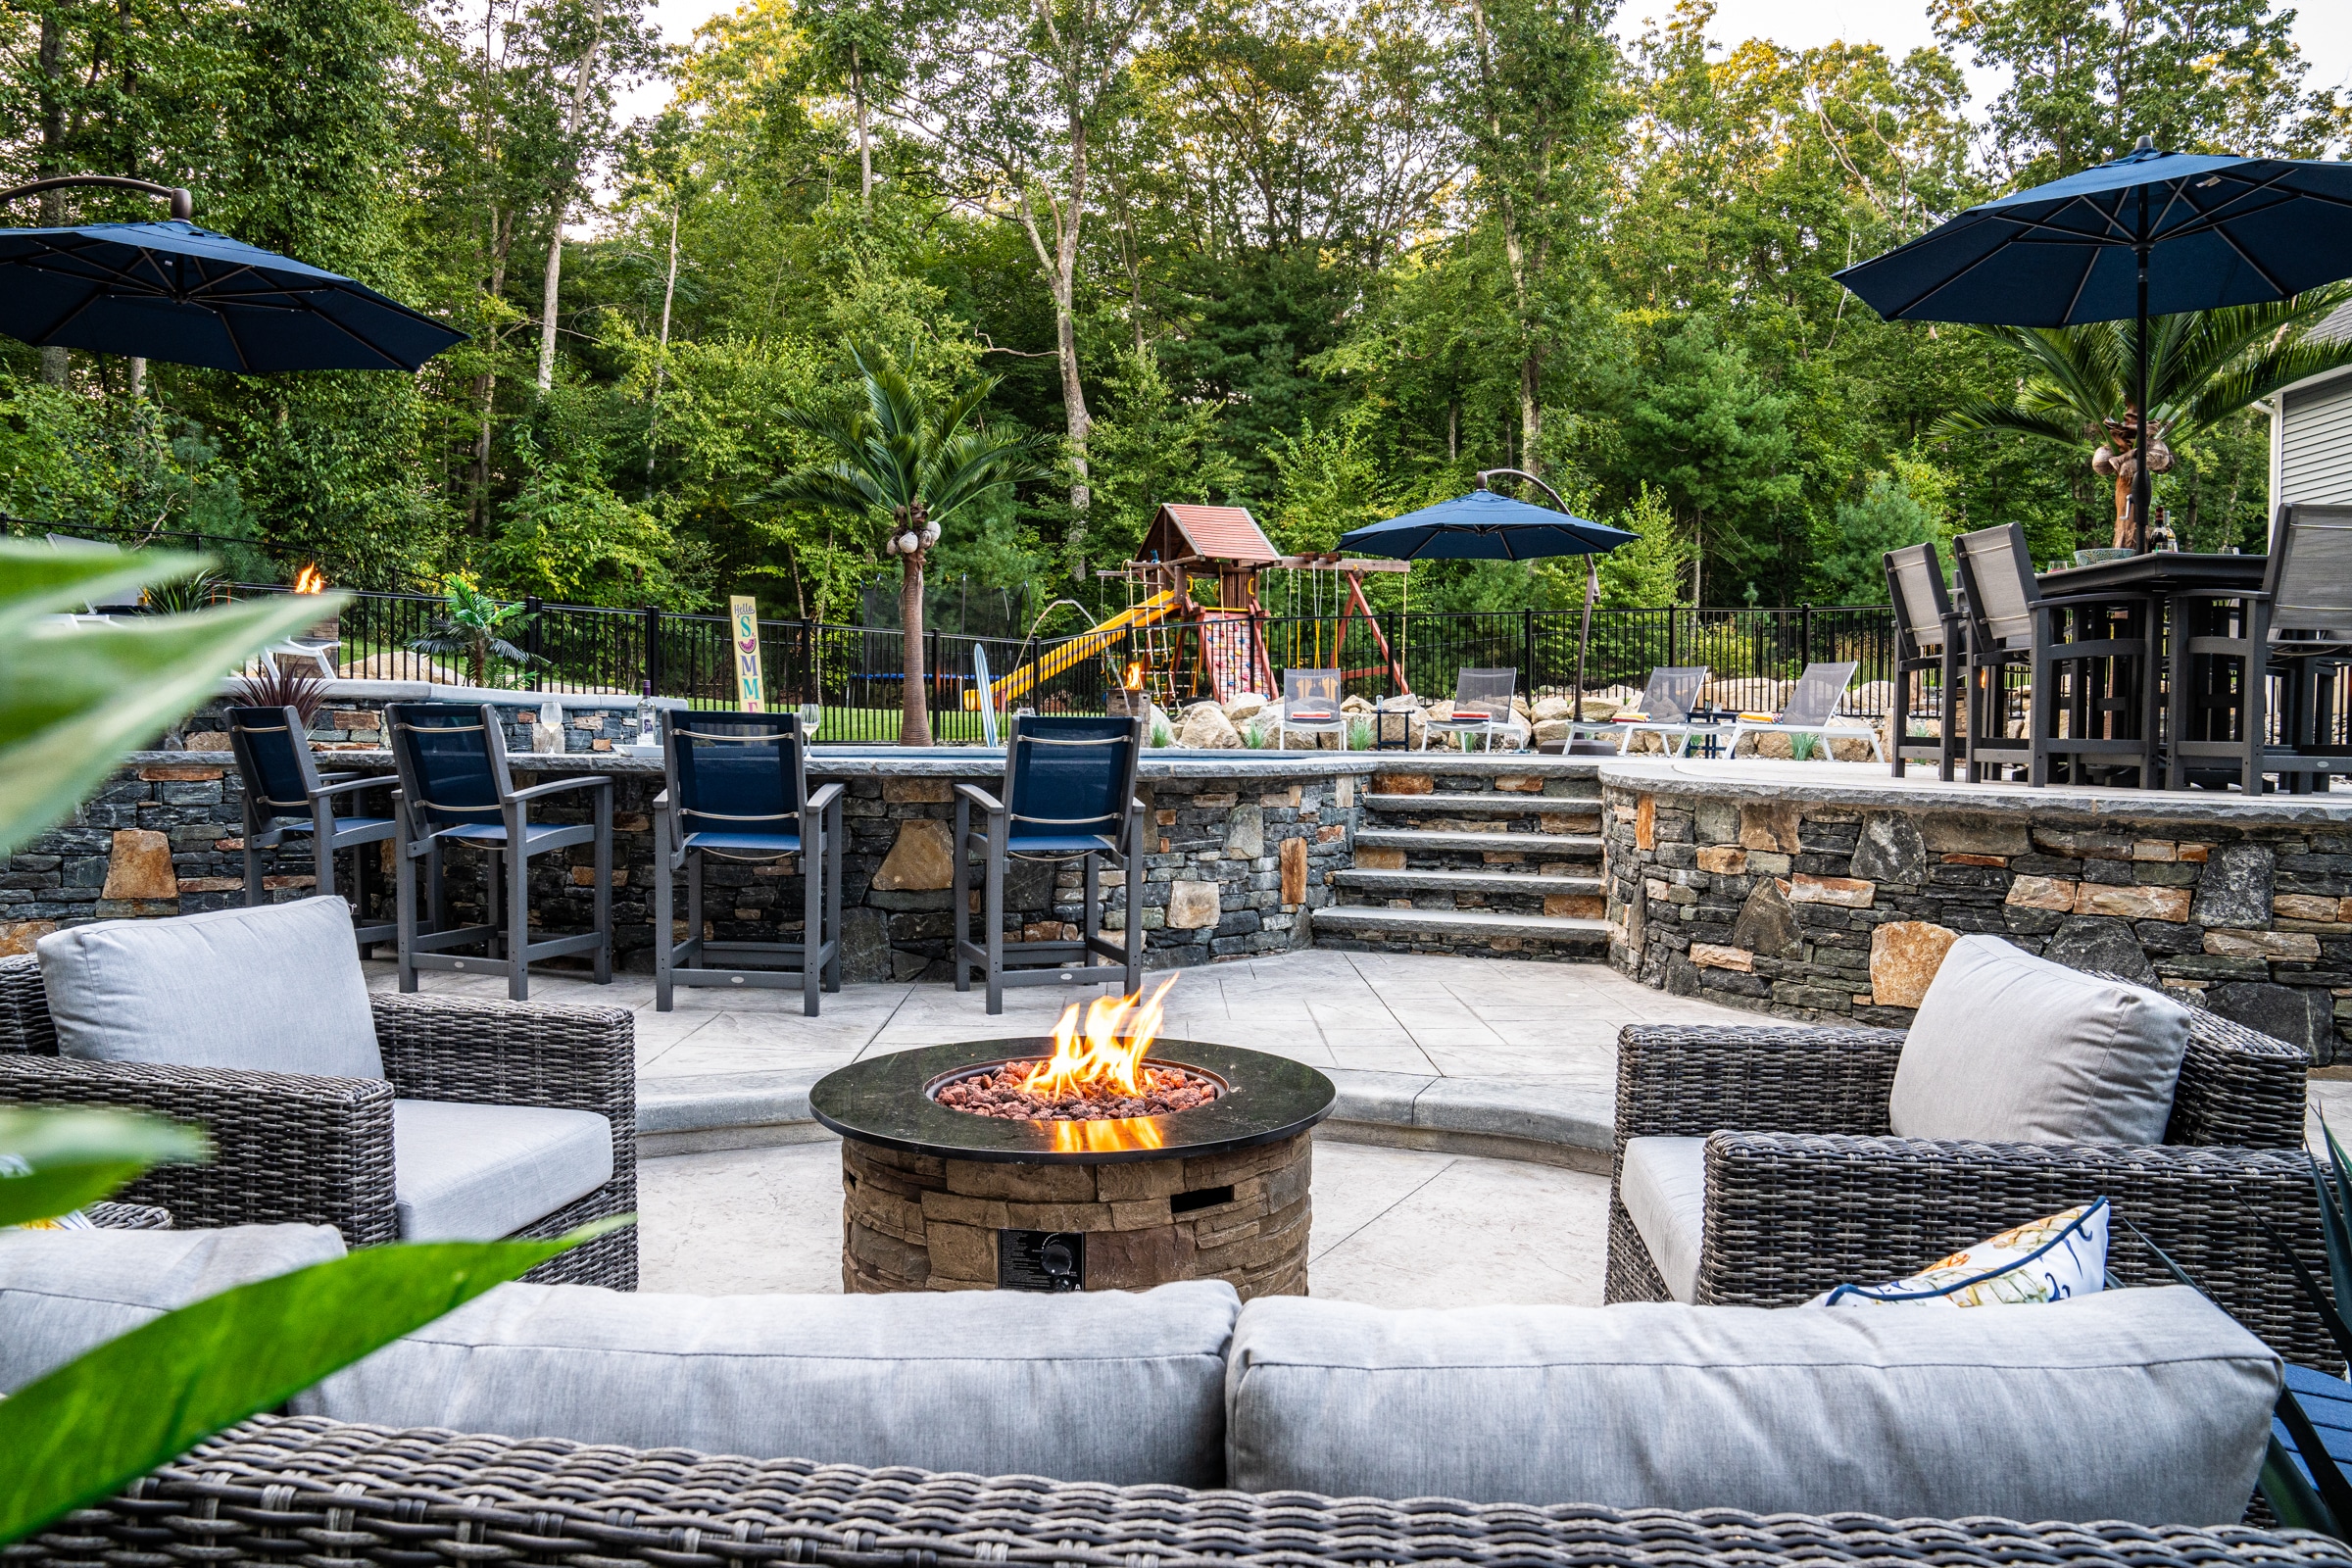 A stamped concrete fire pit patio with an elevated pool deck and poolside bar in the background. Dex by Terra hardscape project.